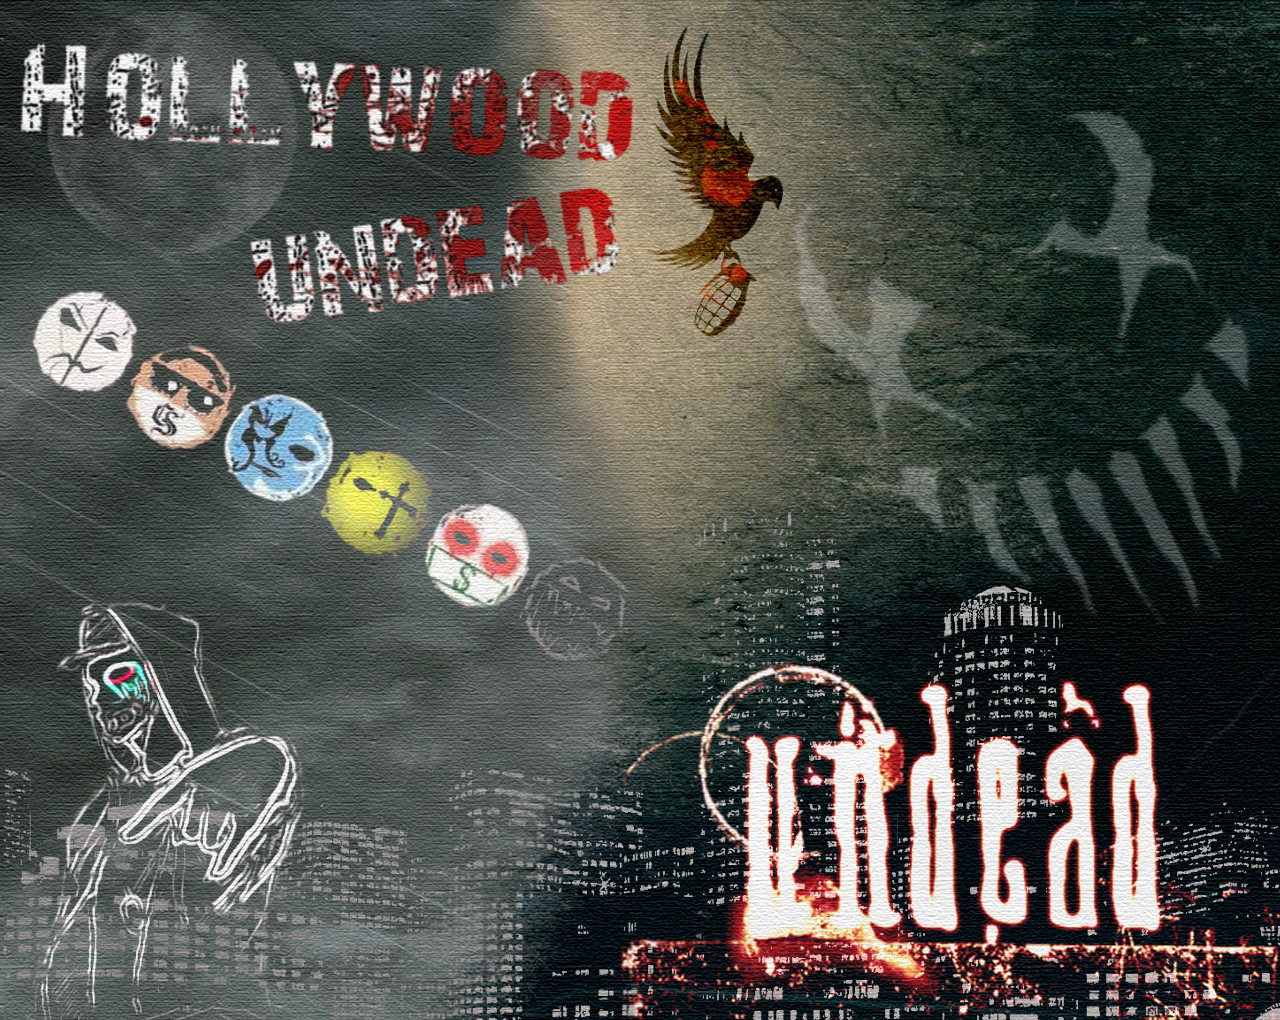 Hollywood Undead Wallpaper by noNaFPS by noNaFPS on